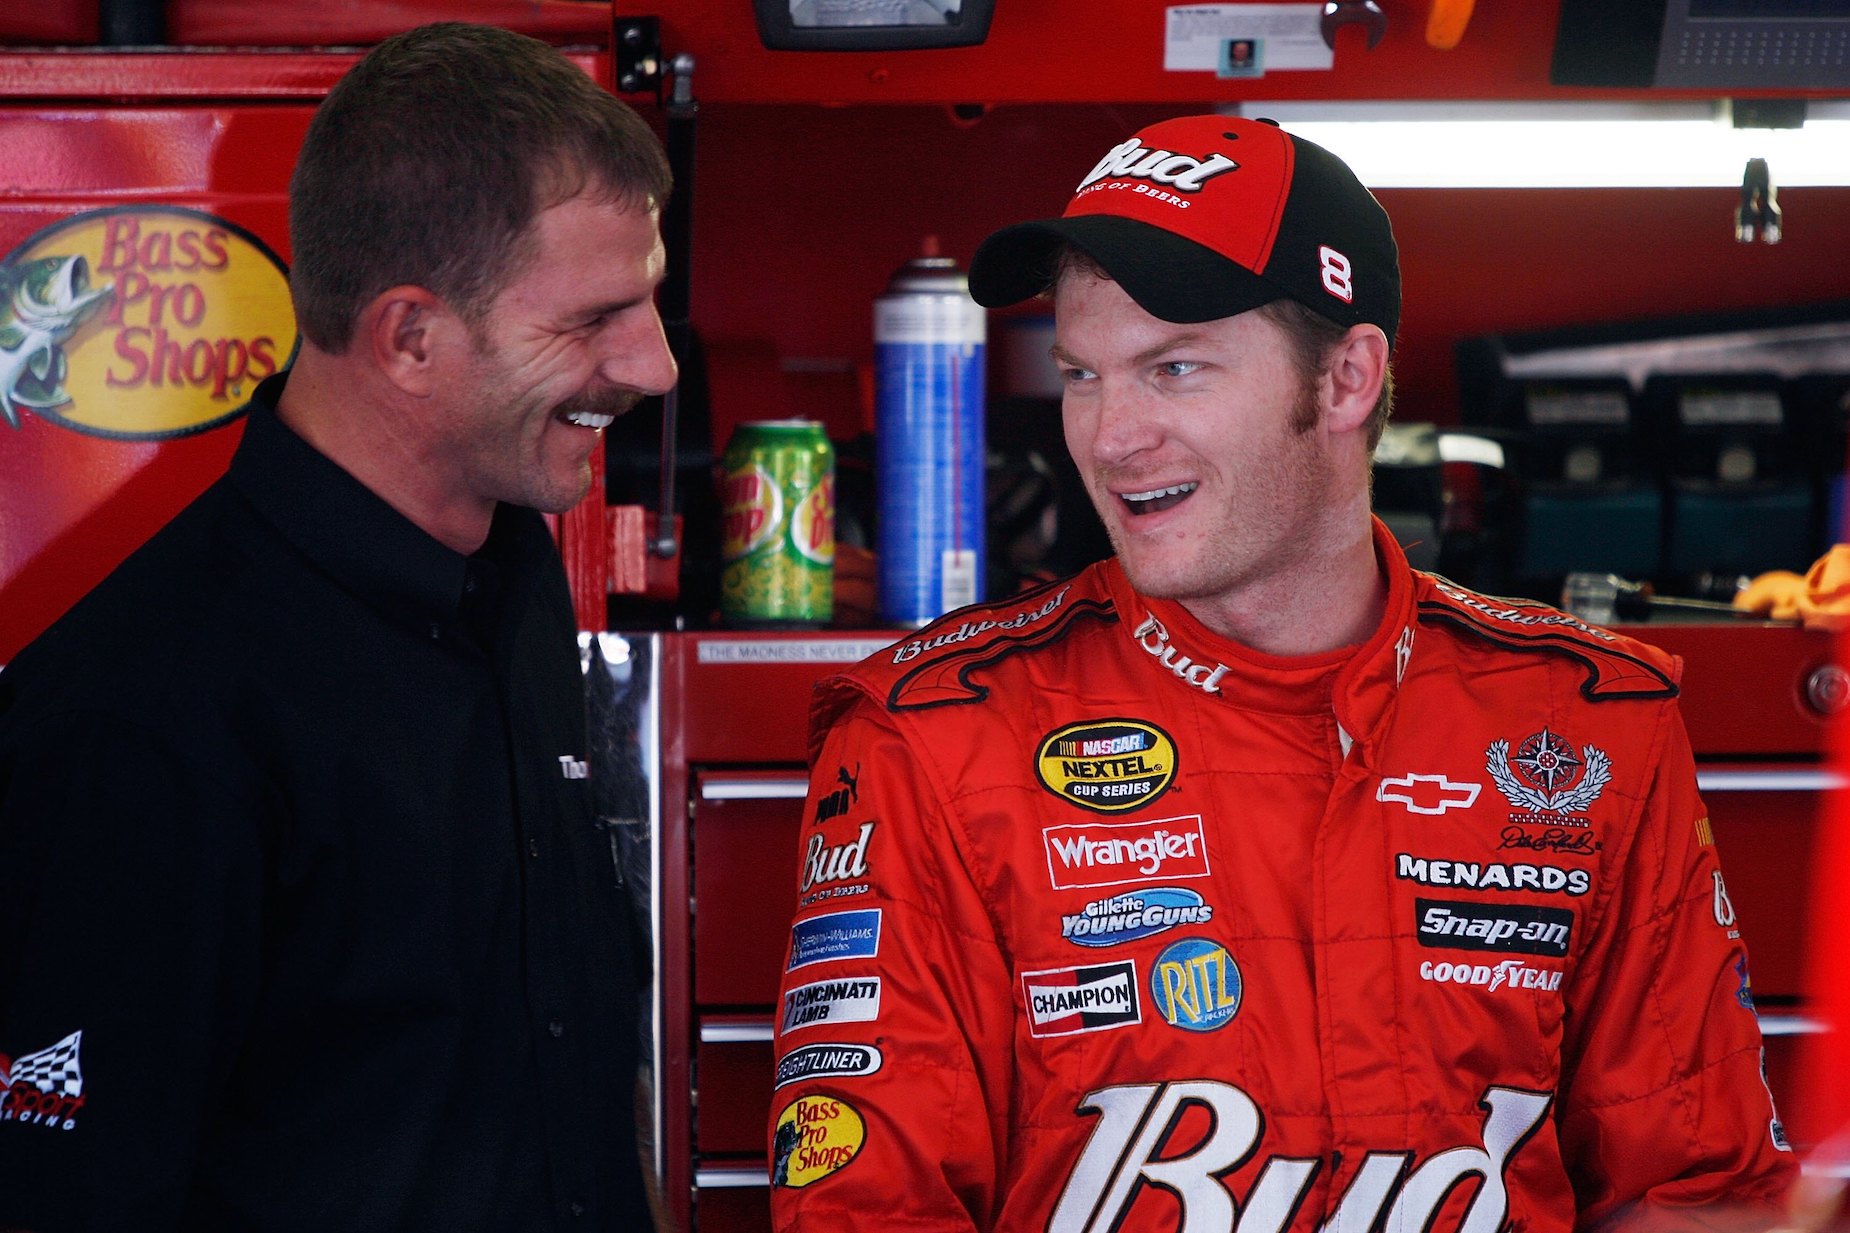 Brothers Kerry Earnhardt and Dale Earnhardt Jr.